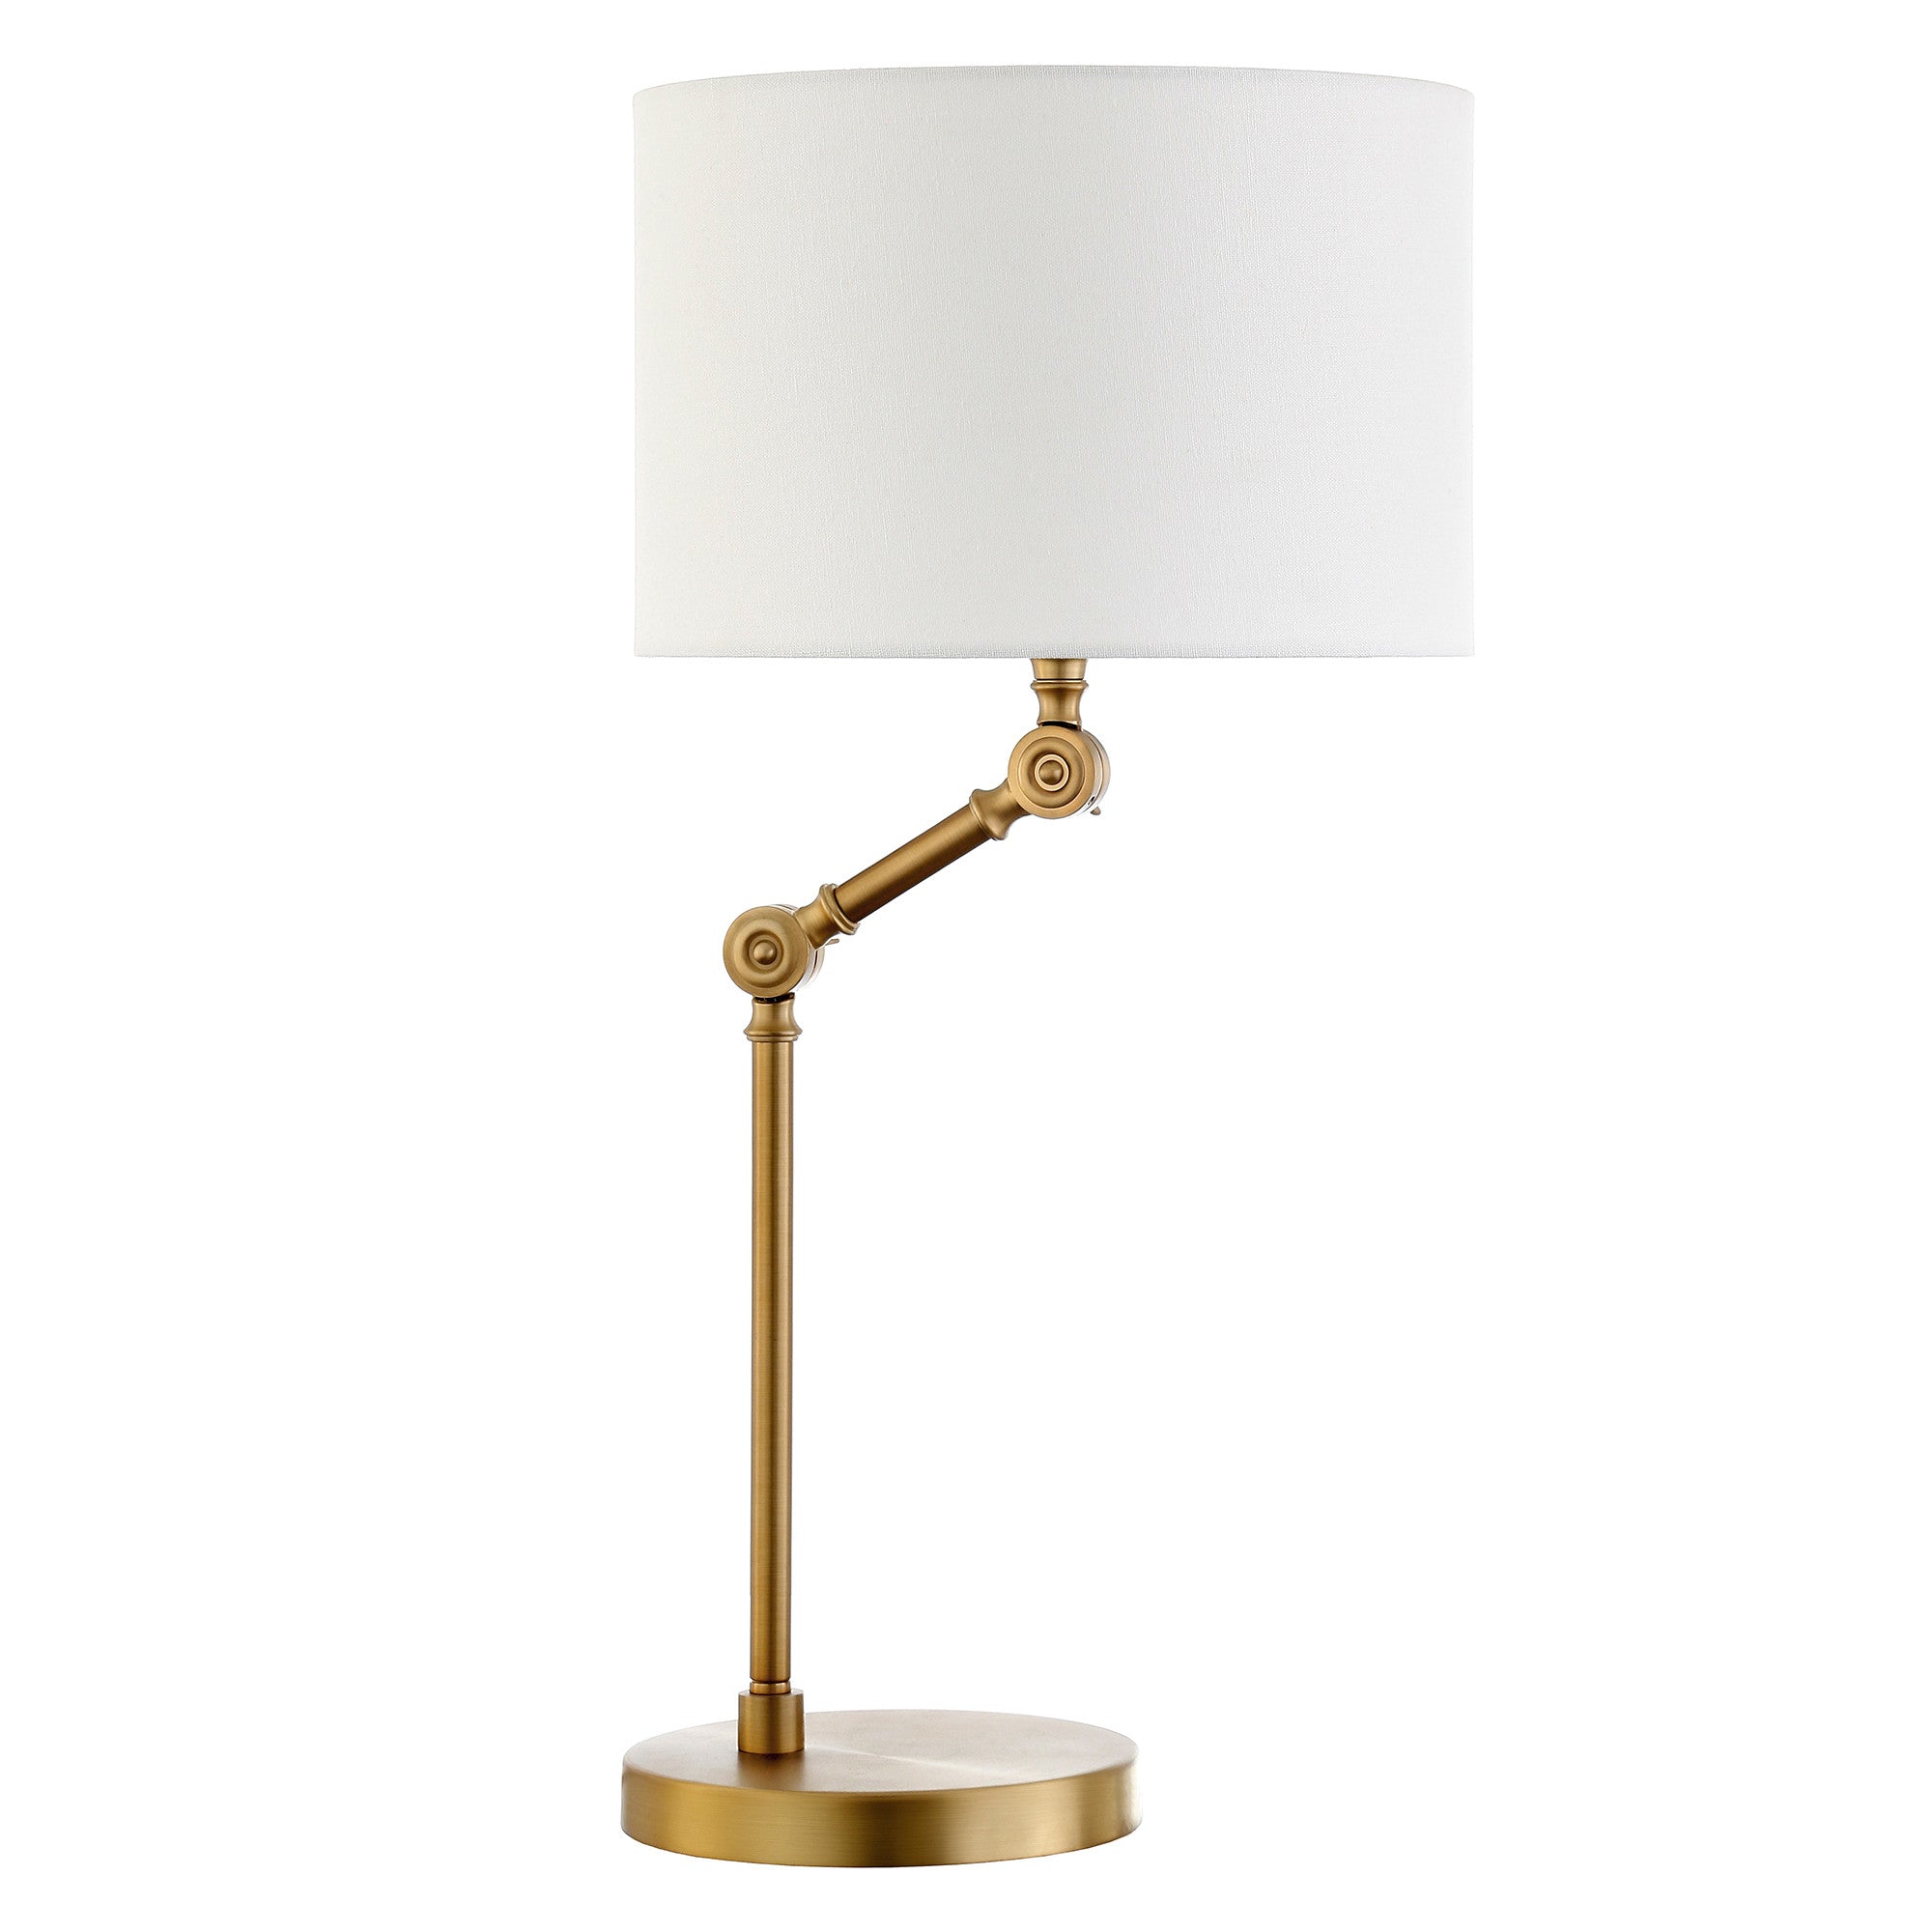 24" Gold Metal Adjustable Table Lamp With White Drum Shade